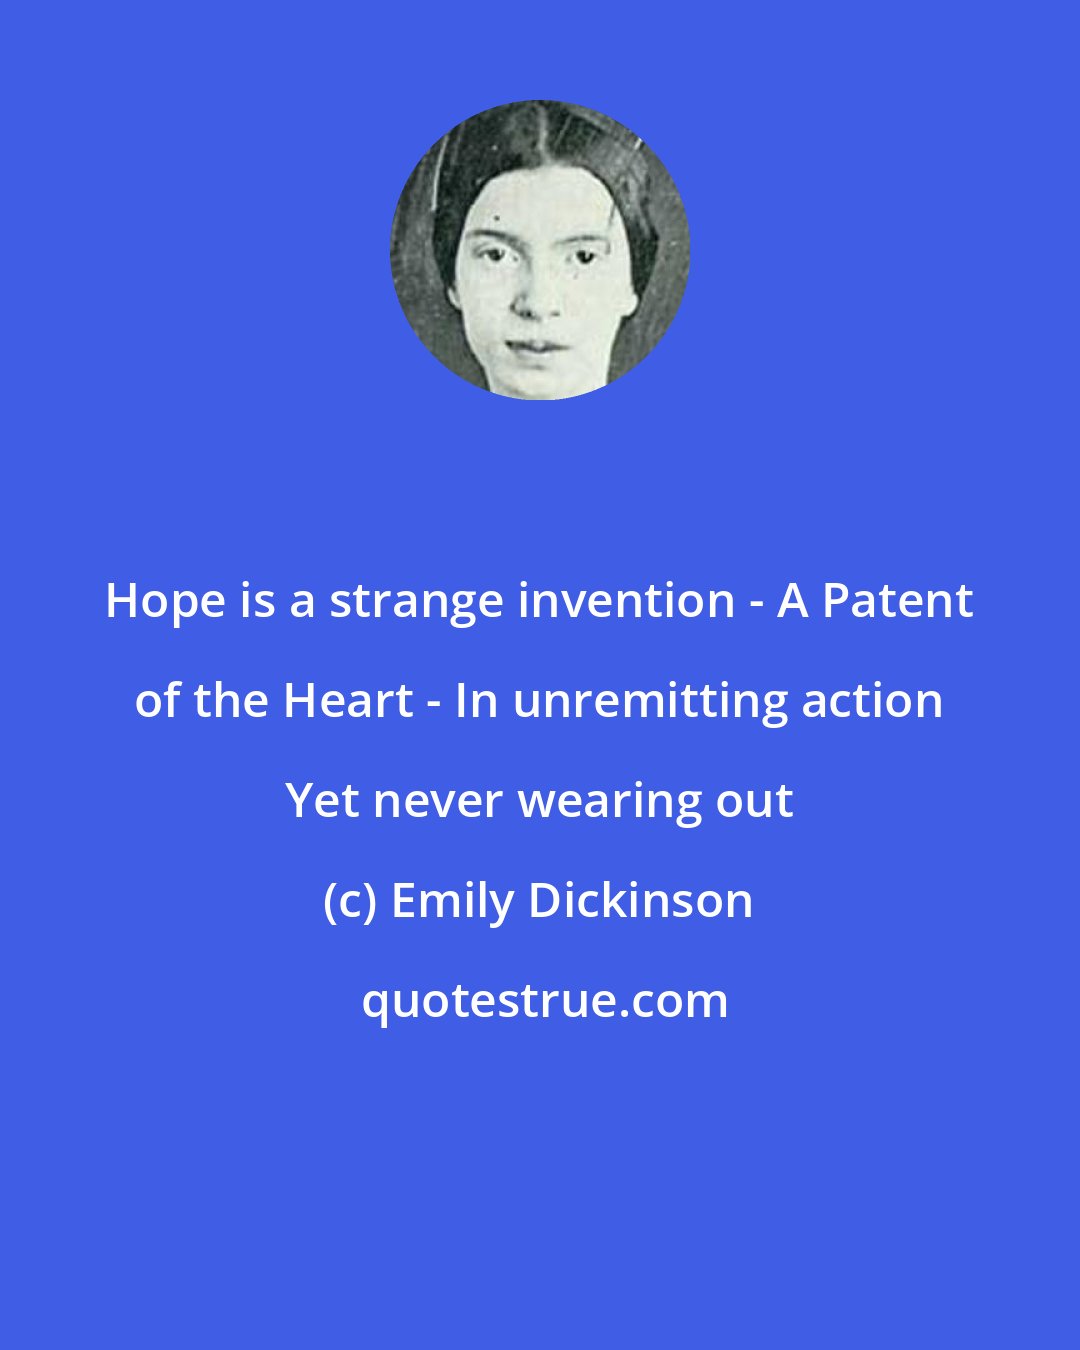 Emily Dickinson: Hope is a strange invention - A Patent of the Heart - In unremitting action Yet never wearing out